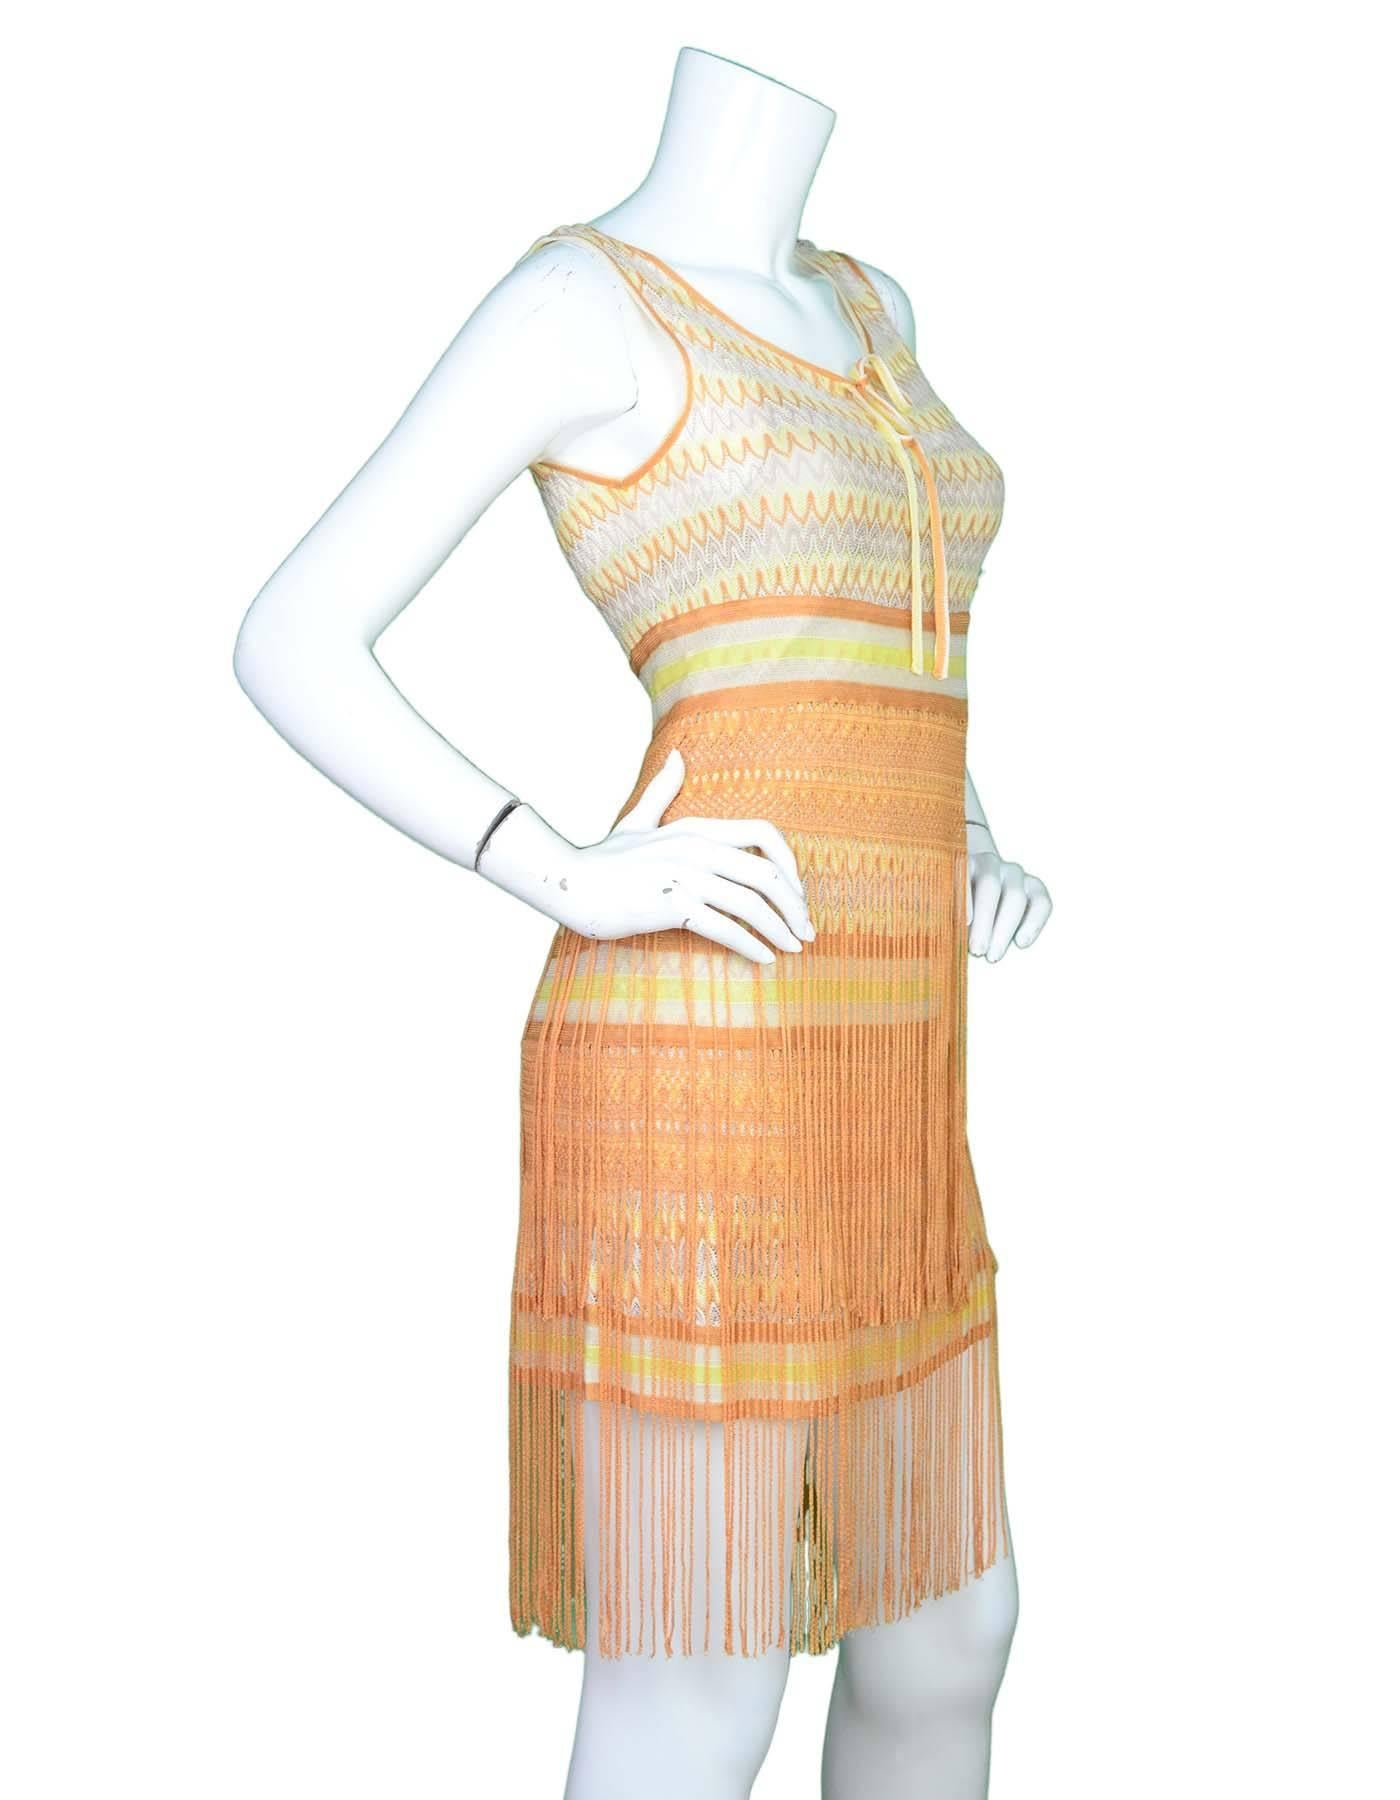 Missoni Yellow and Cream Fringe Dress Sz 40
Features beaded and sequin ball beads throughout

Made In: Italy
Color: Cream, yellow
Lining: Cream under slip
Closure/Opening: Hidden side zip closure
Exterior Pockets: None
Interior Pockets: